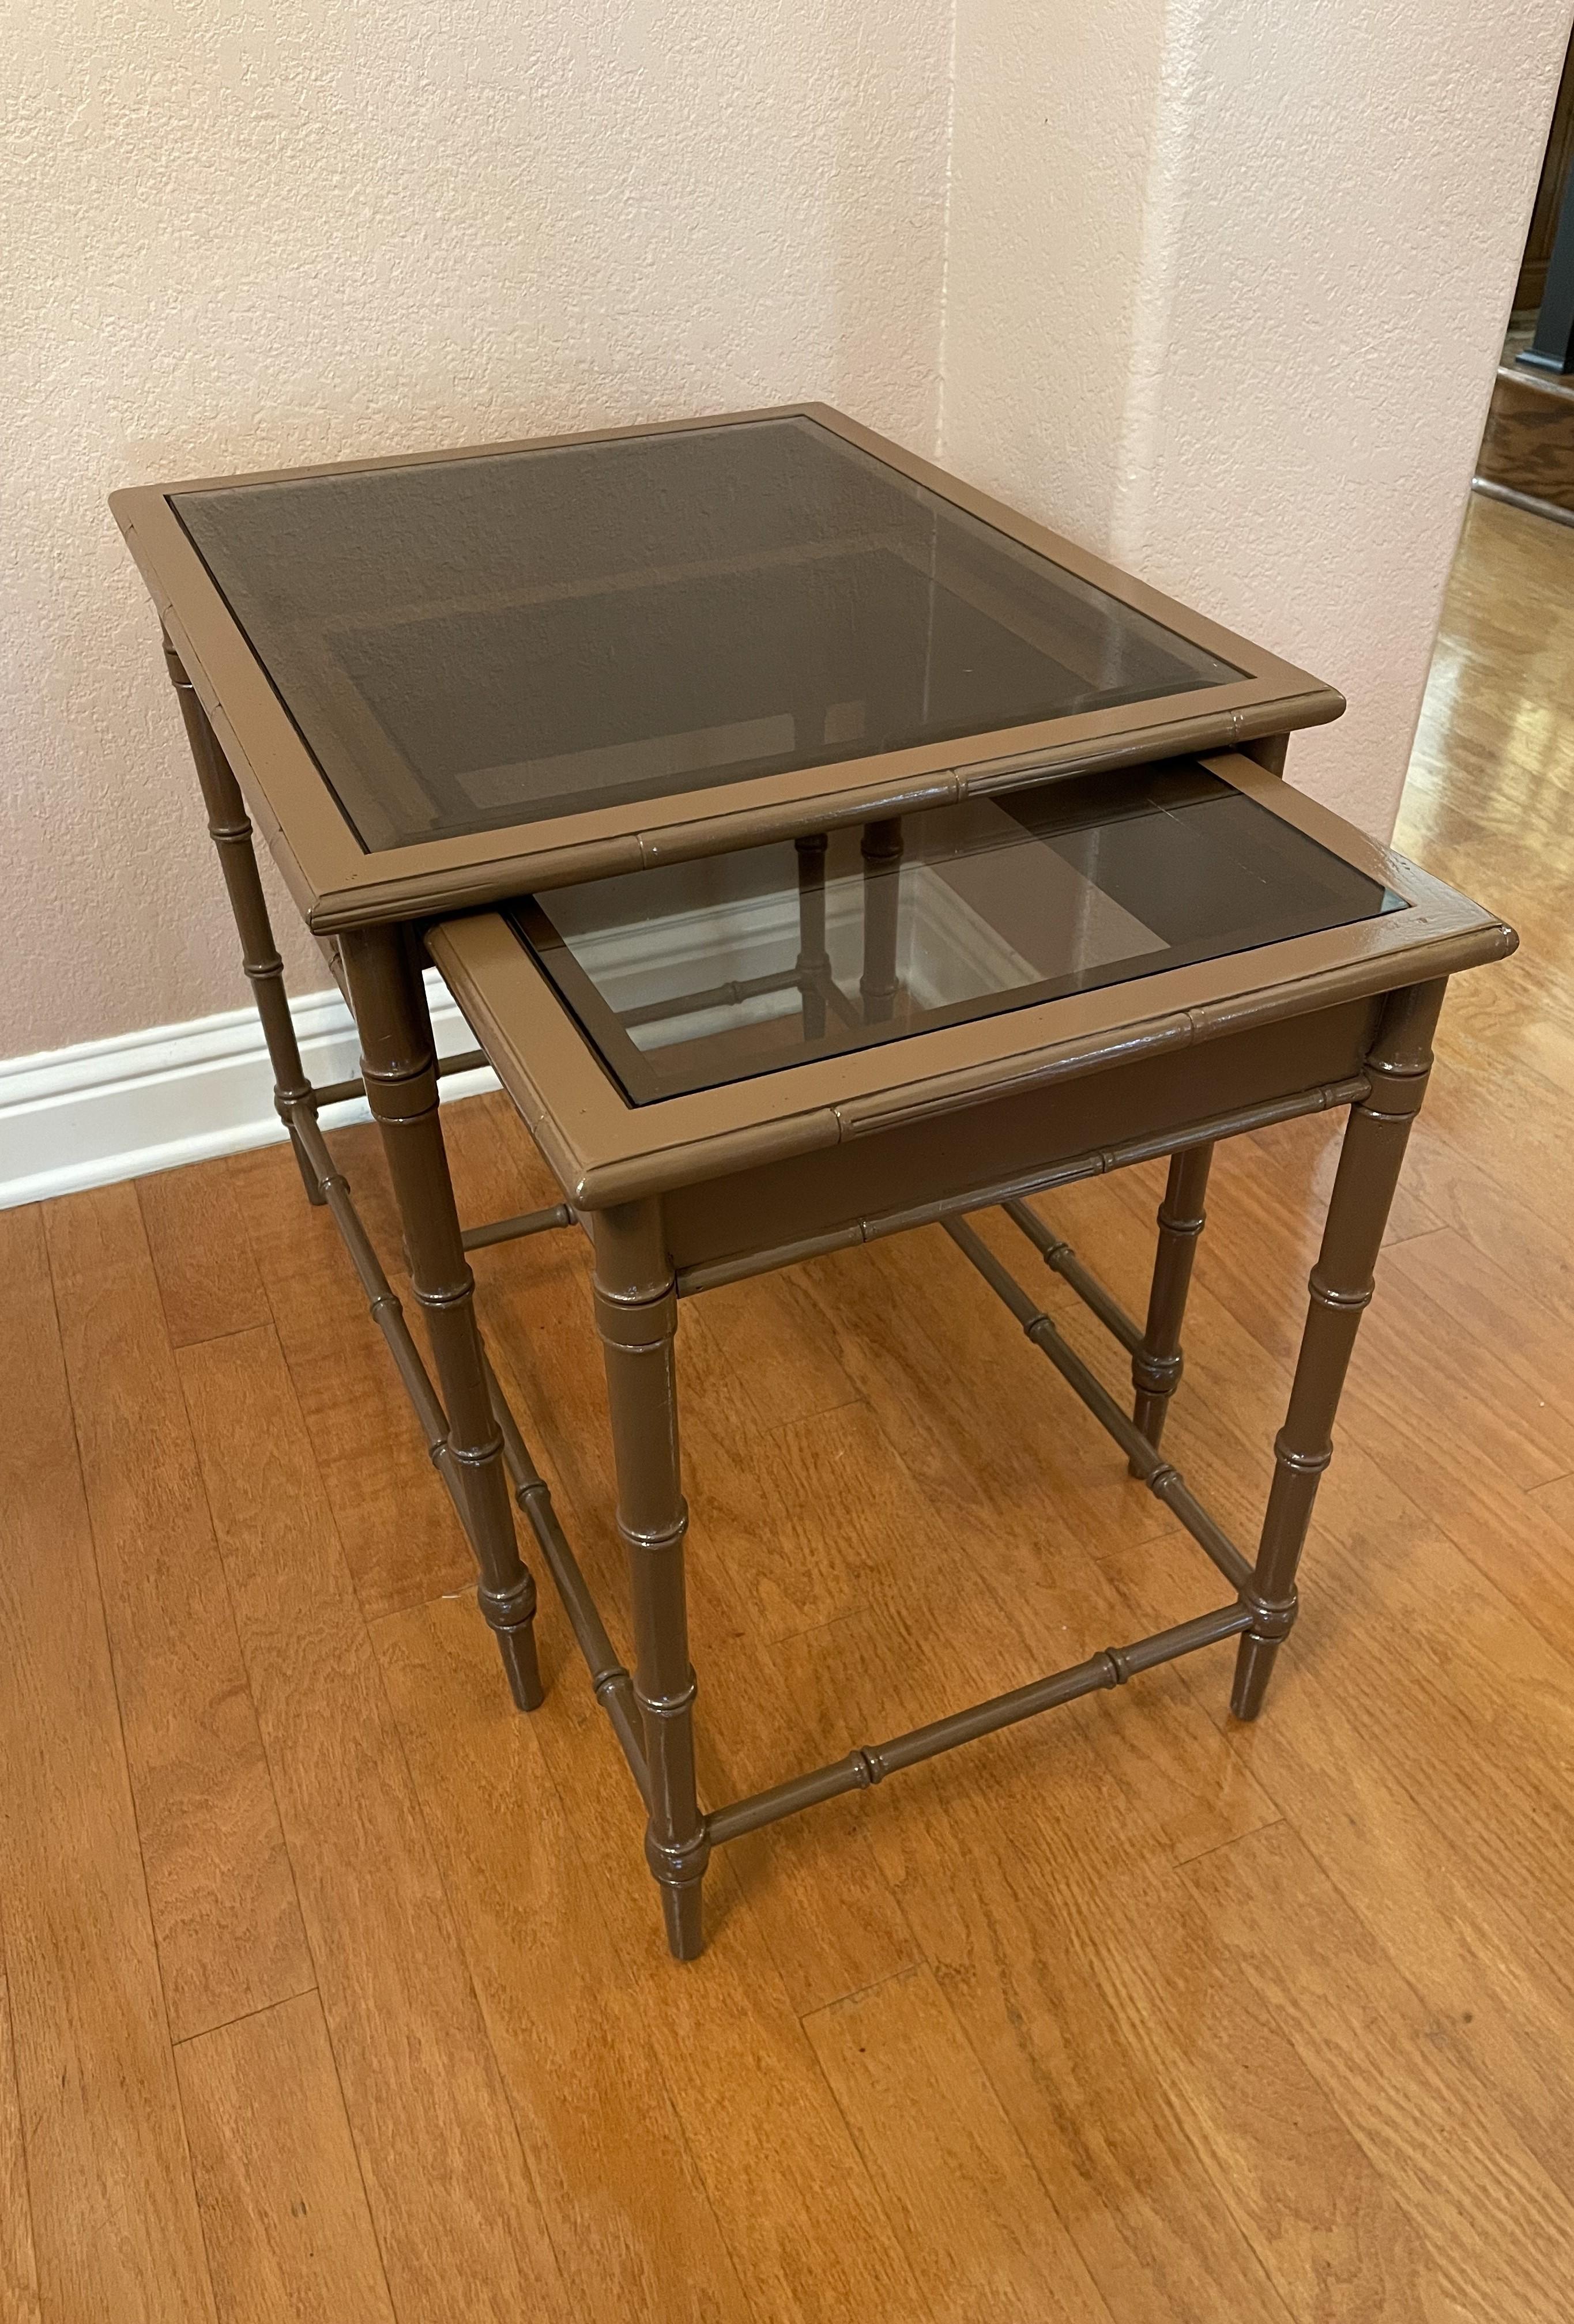 This two-piece nesting table is a versatile neutral accent table. For the most part it will work anywhere, from extra surface area in a study or home office to a sofa-side table. It's straight from the 1970s -- with the smokey-glass tops serving as